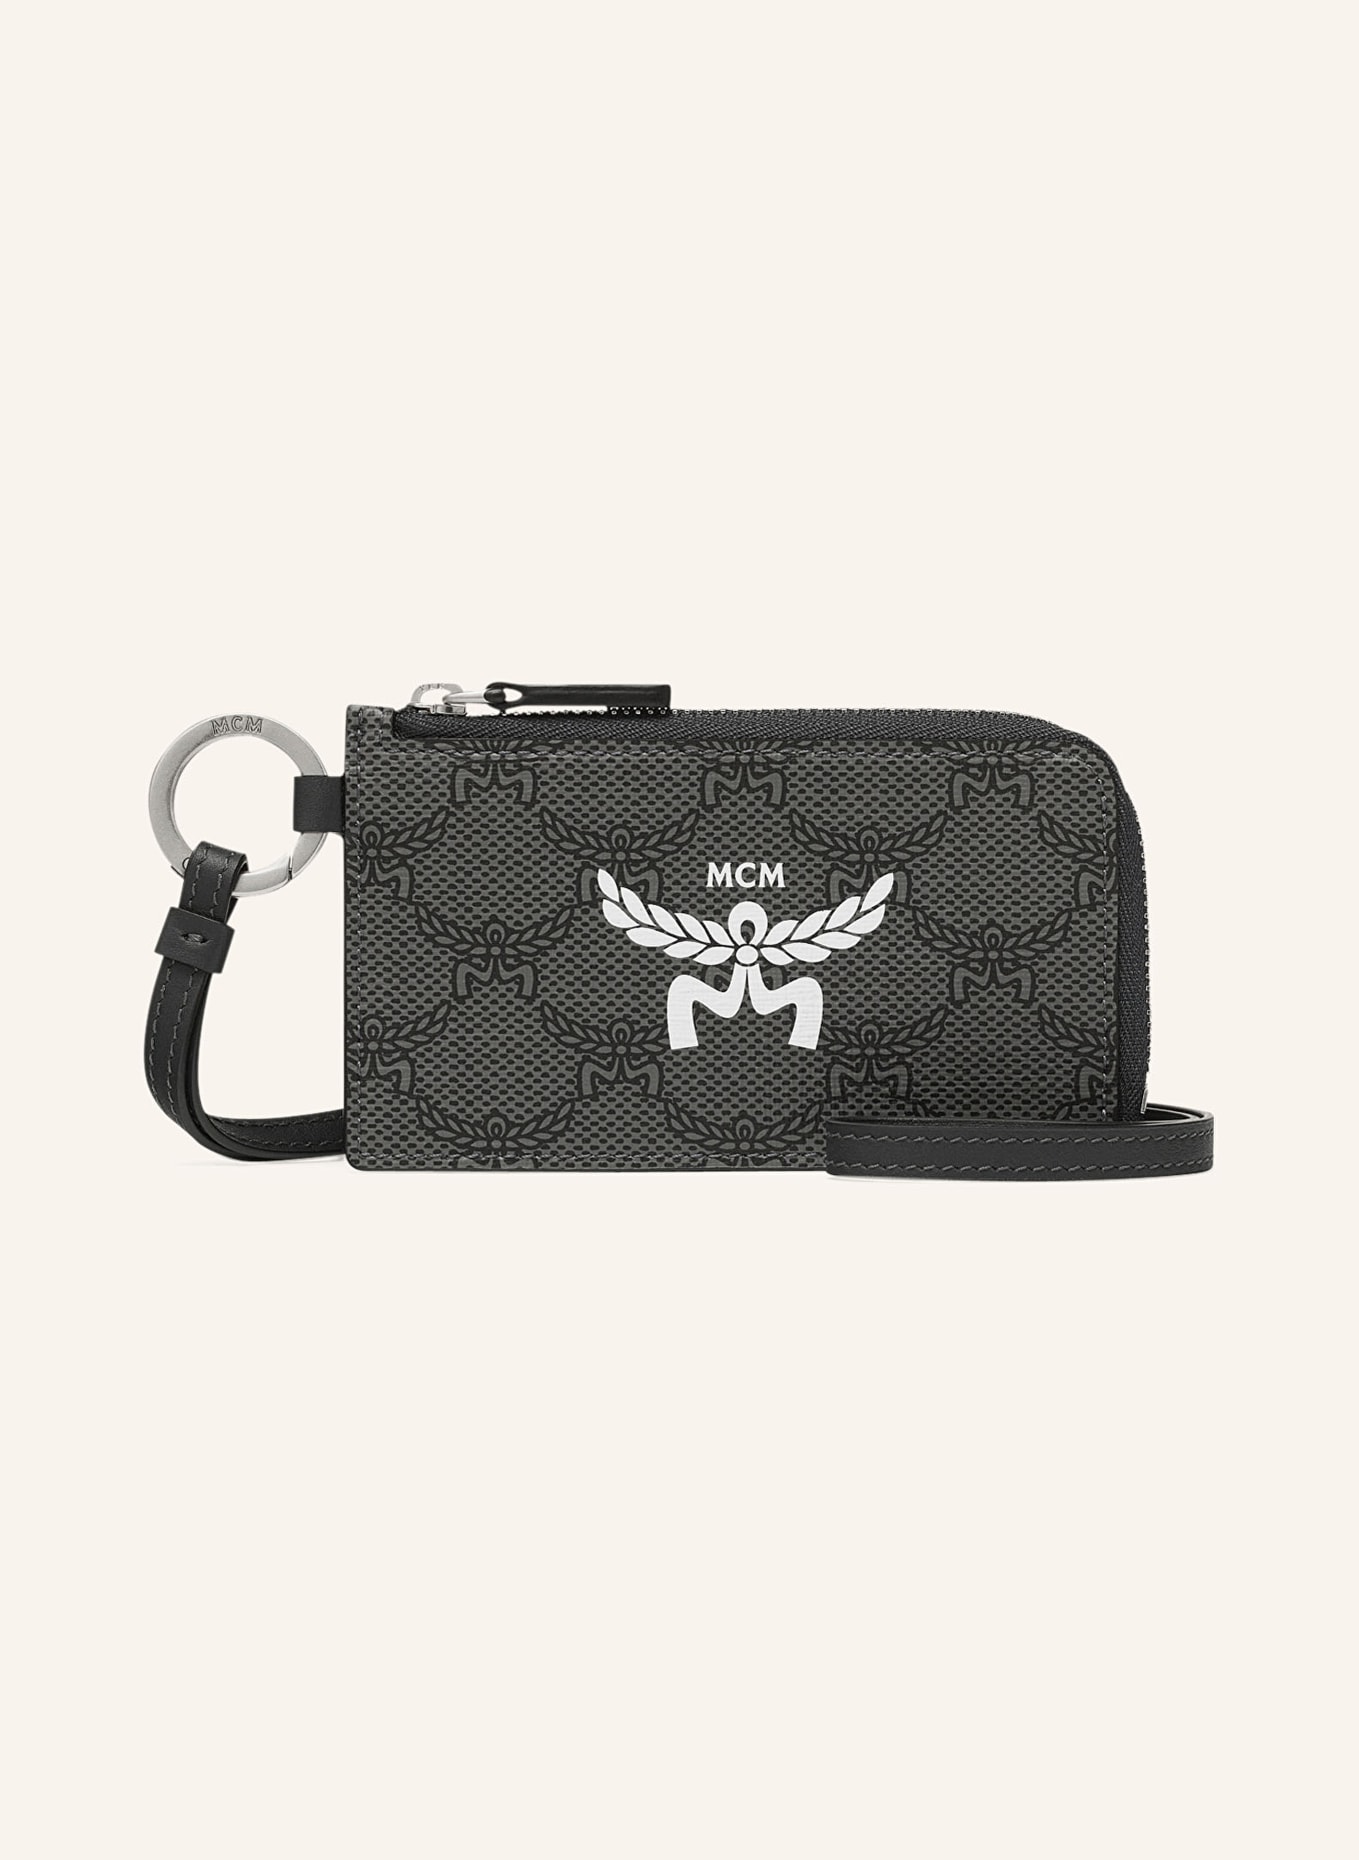 MCM Card case HIMMEL with coin compartment, Color: DARK GRAY (Image 1)